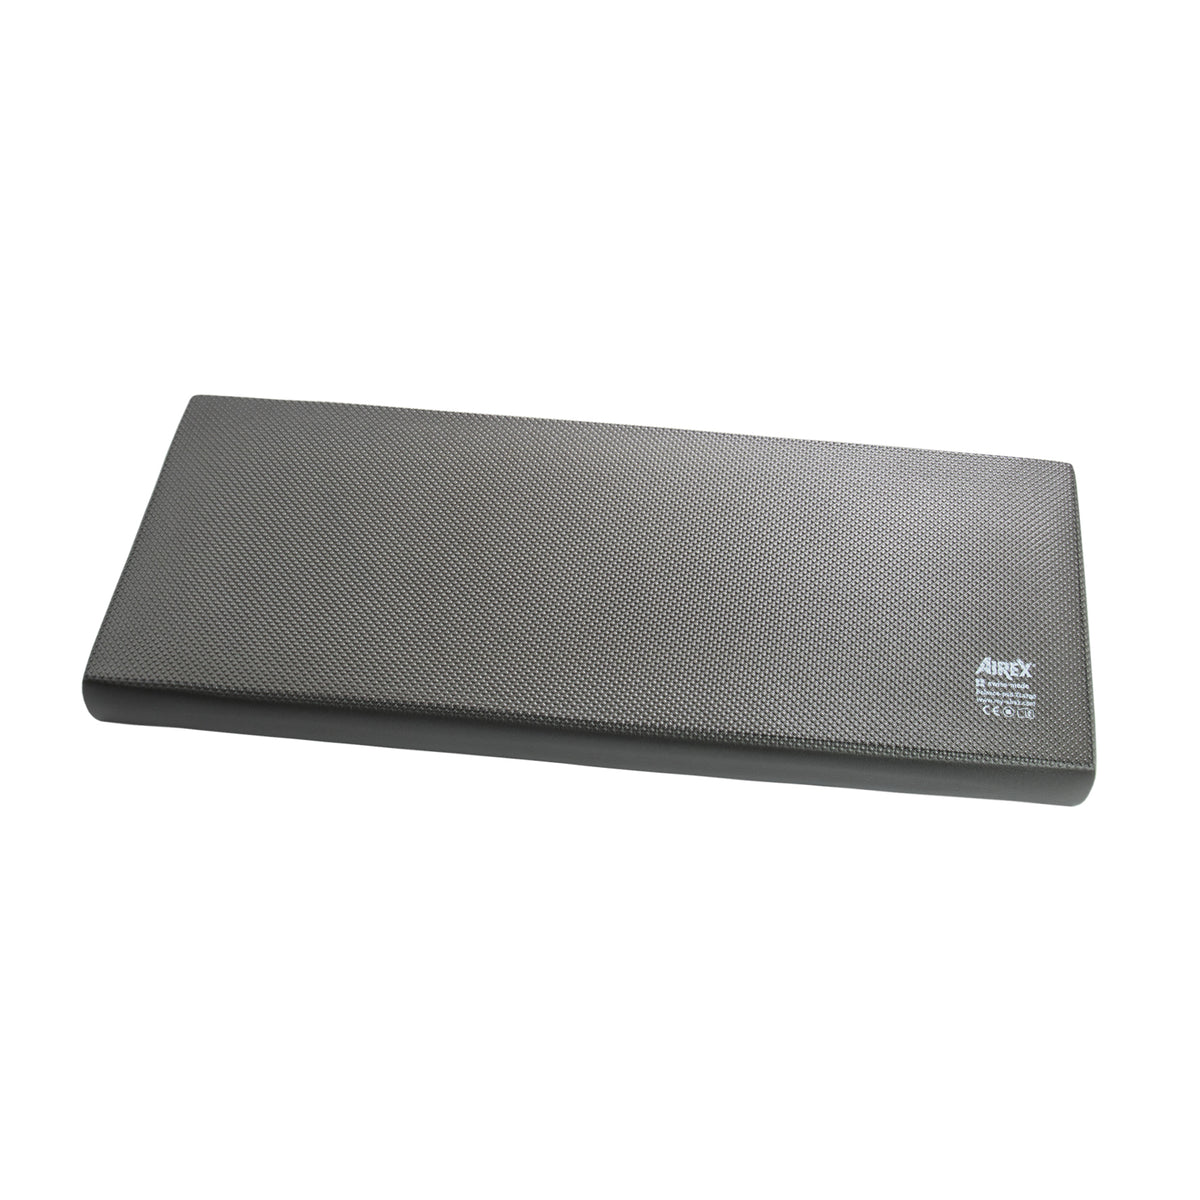 Clever Yoga X-Large Balance Pad 19.75x15.75x2.5- Comes with Our Special  Na